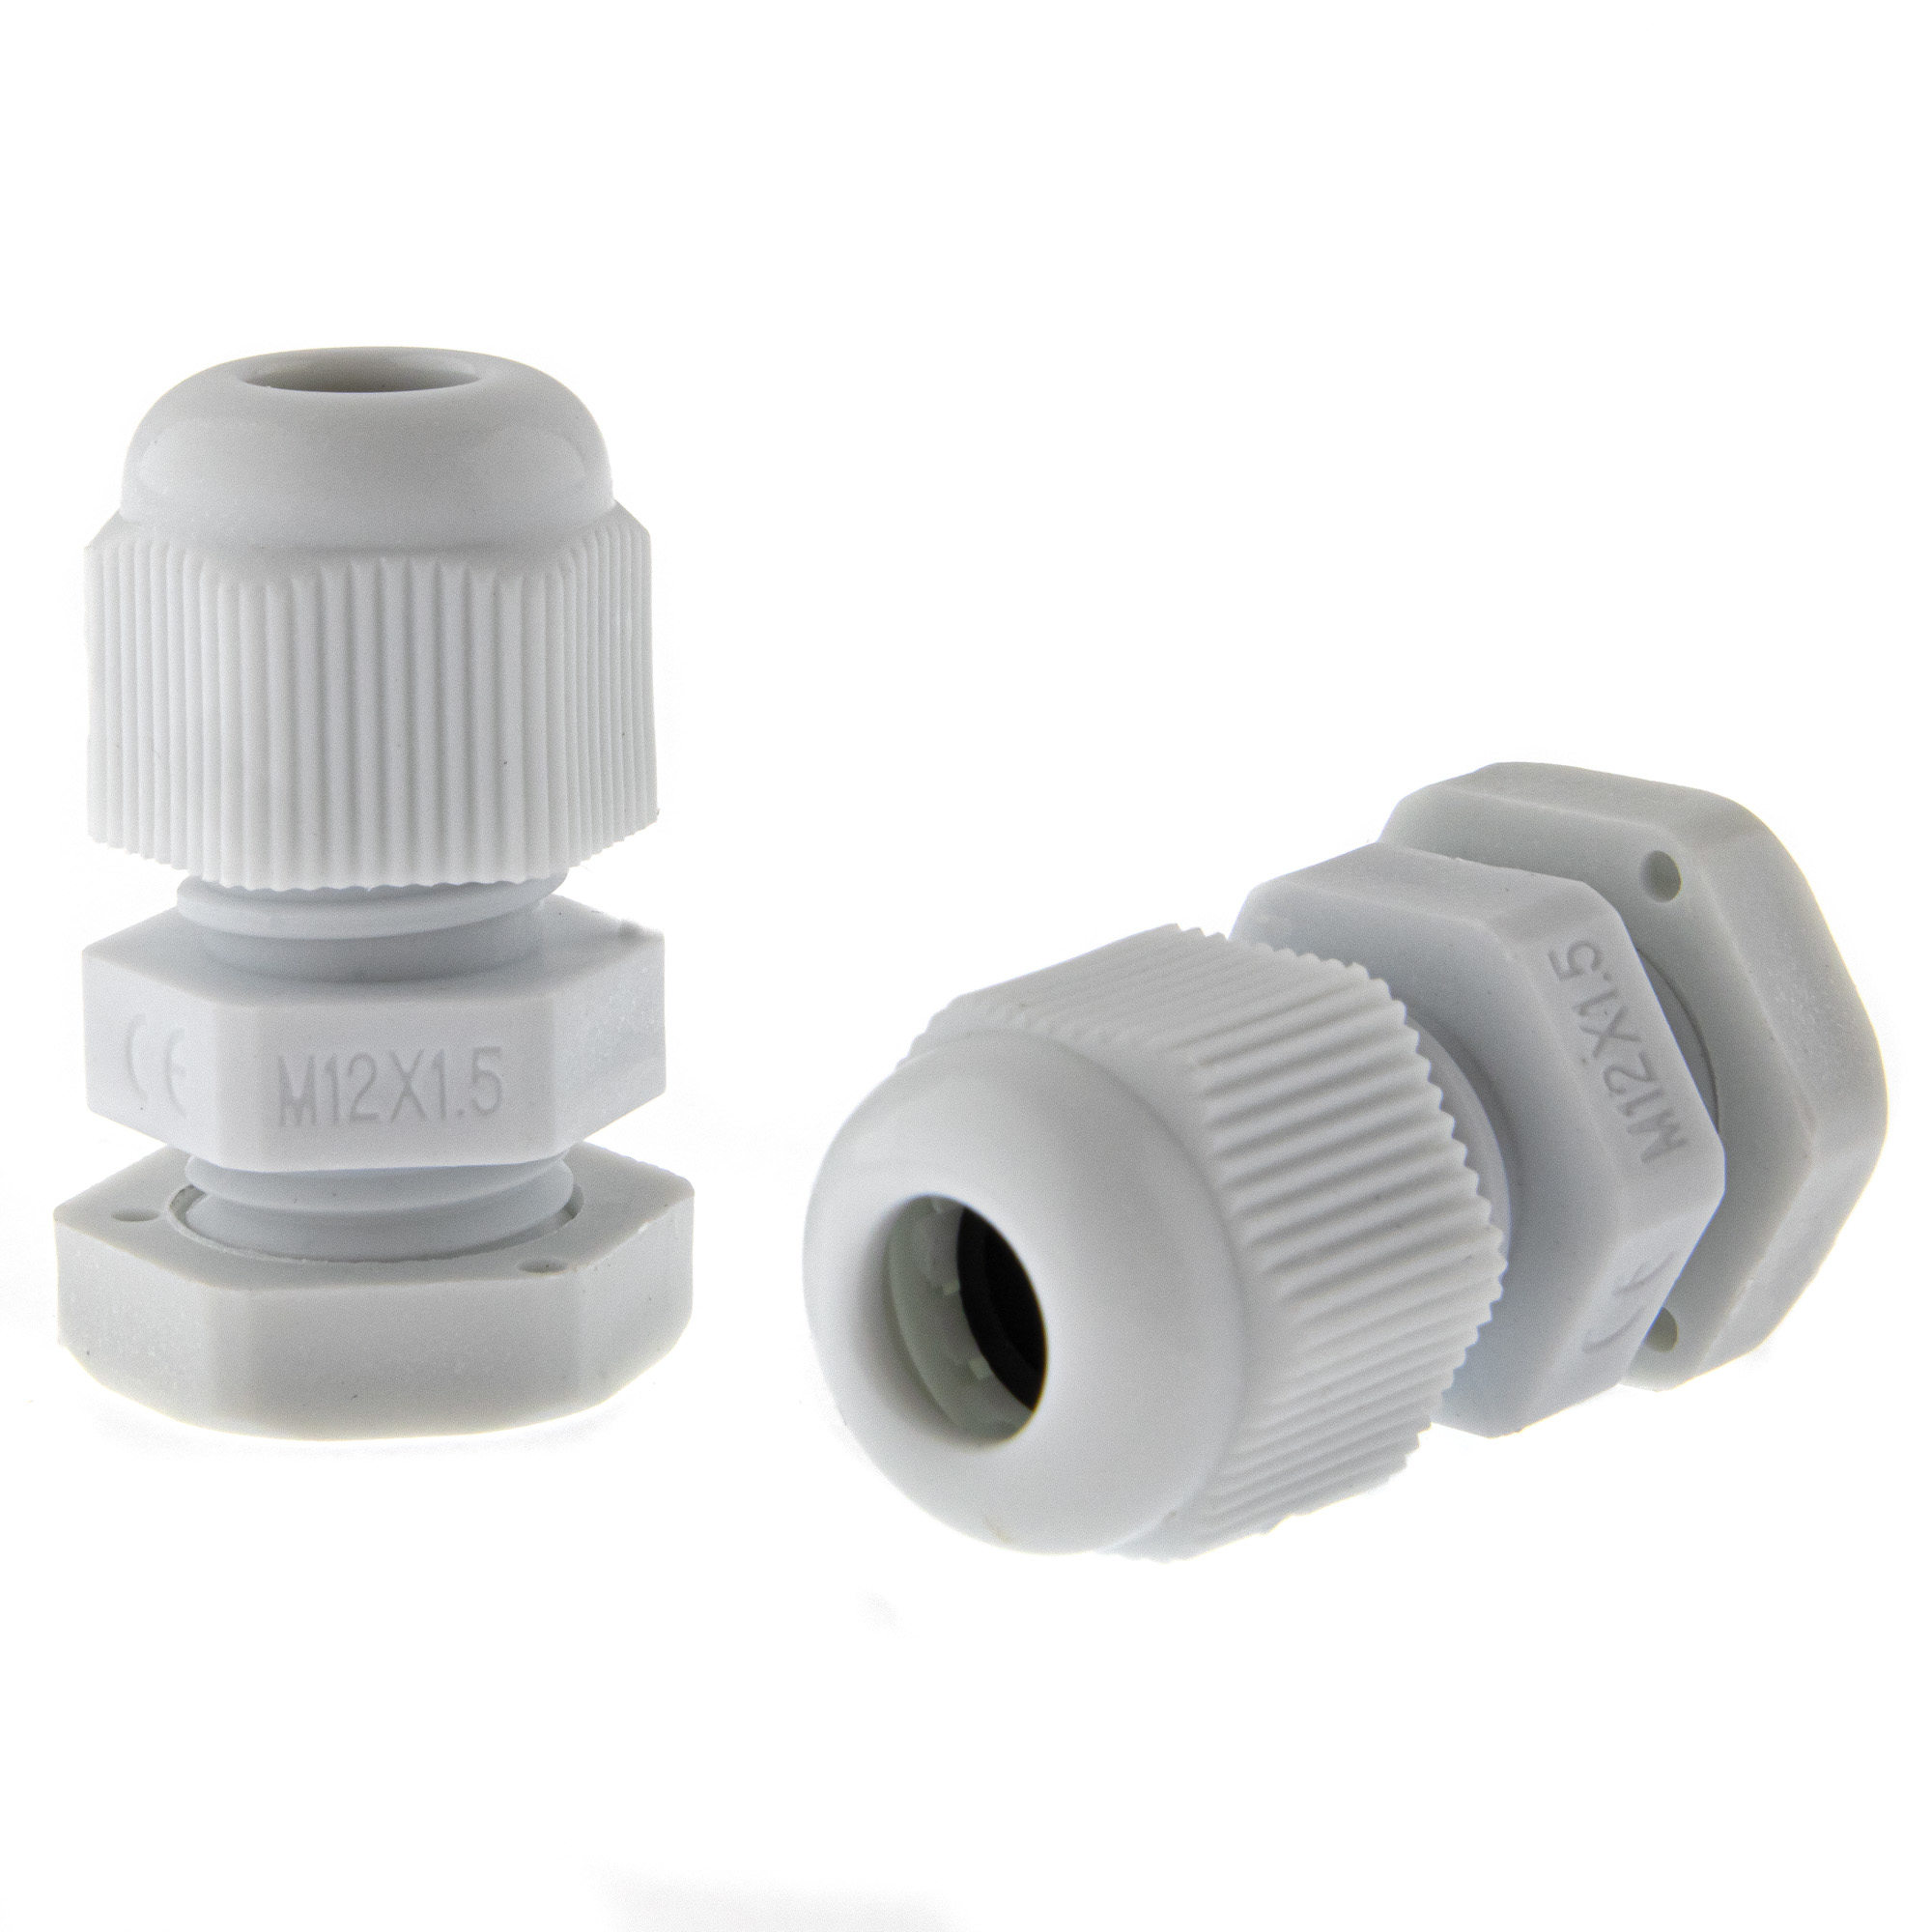 Cable gland M12 grey (RAL7035) - 10 PCS